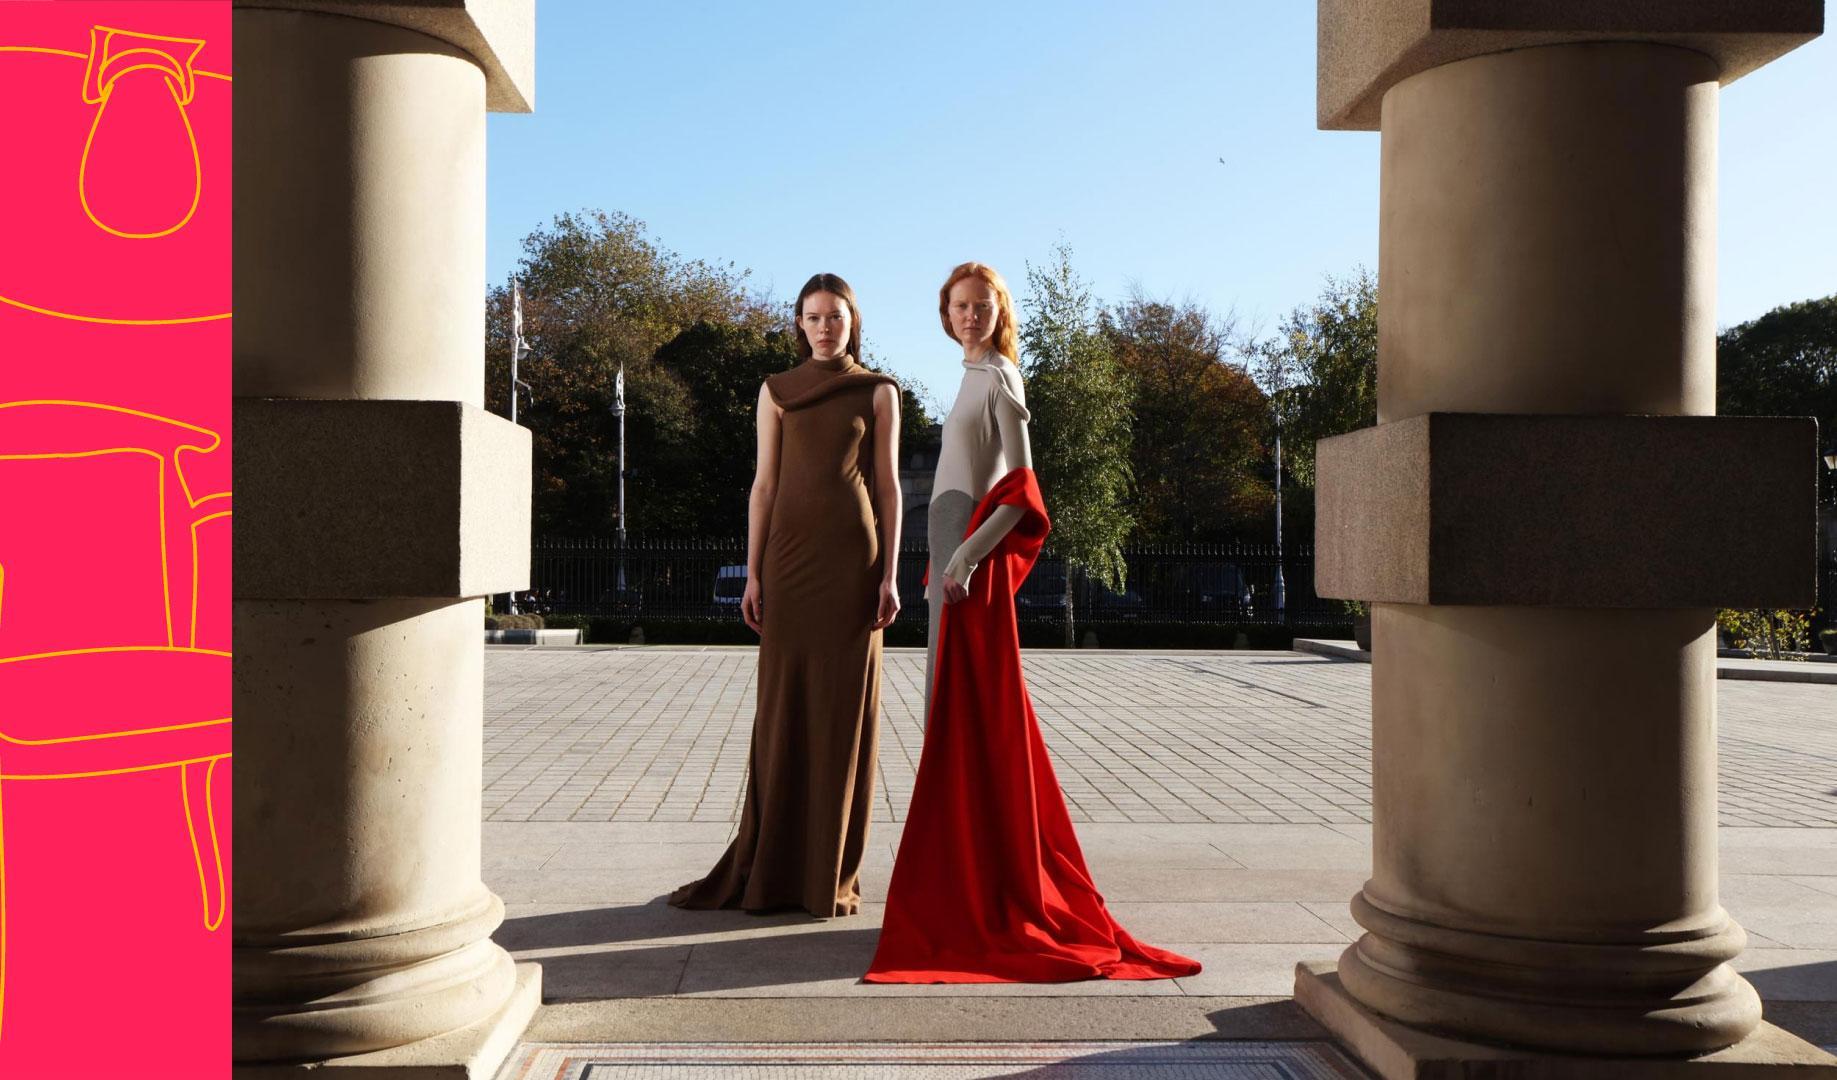 he winners of the prestigious Design & Crafts Council Ireland ‘Future Makers Awards 2022’ were announced at a ceremony on Wednesday 16th November in the National Gallery of Ireland, Merrion Square, Dublin 2. Pictured (l to r) models Elisa and Lucy, wearing Dresses by Michael Stewart (Overall Future Makers Awards Winner 2022).